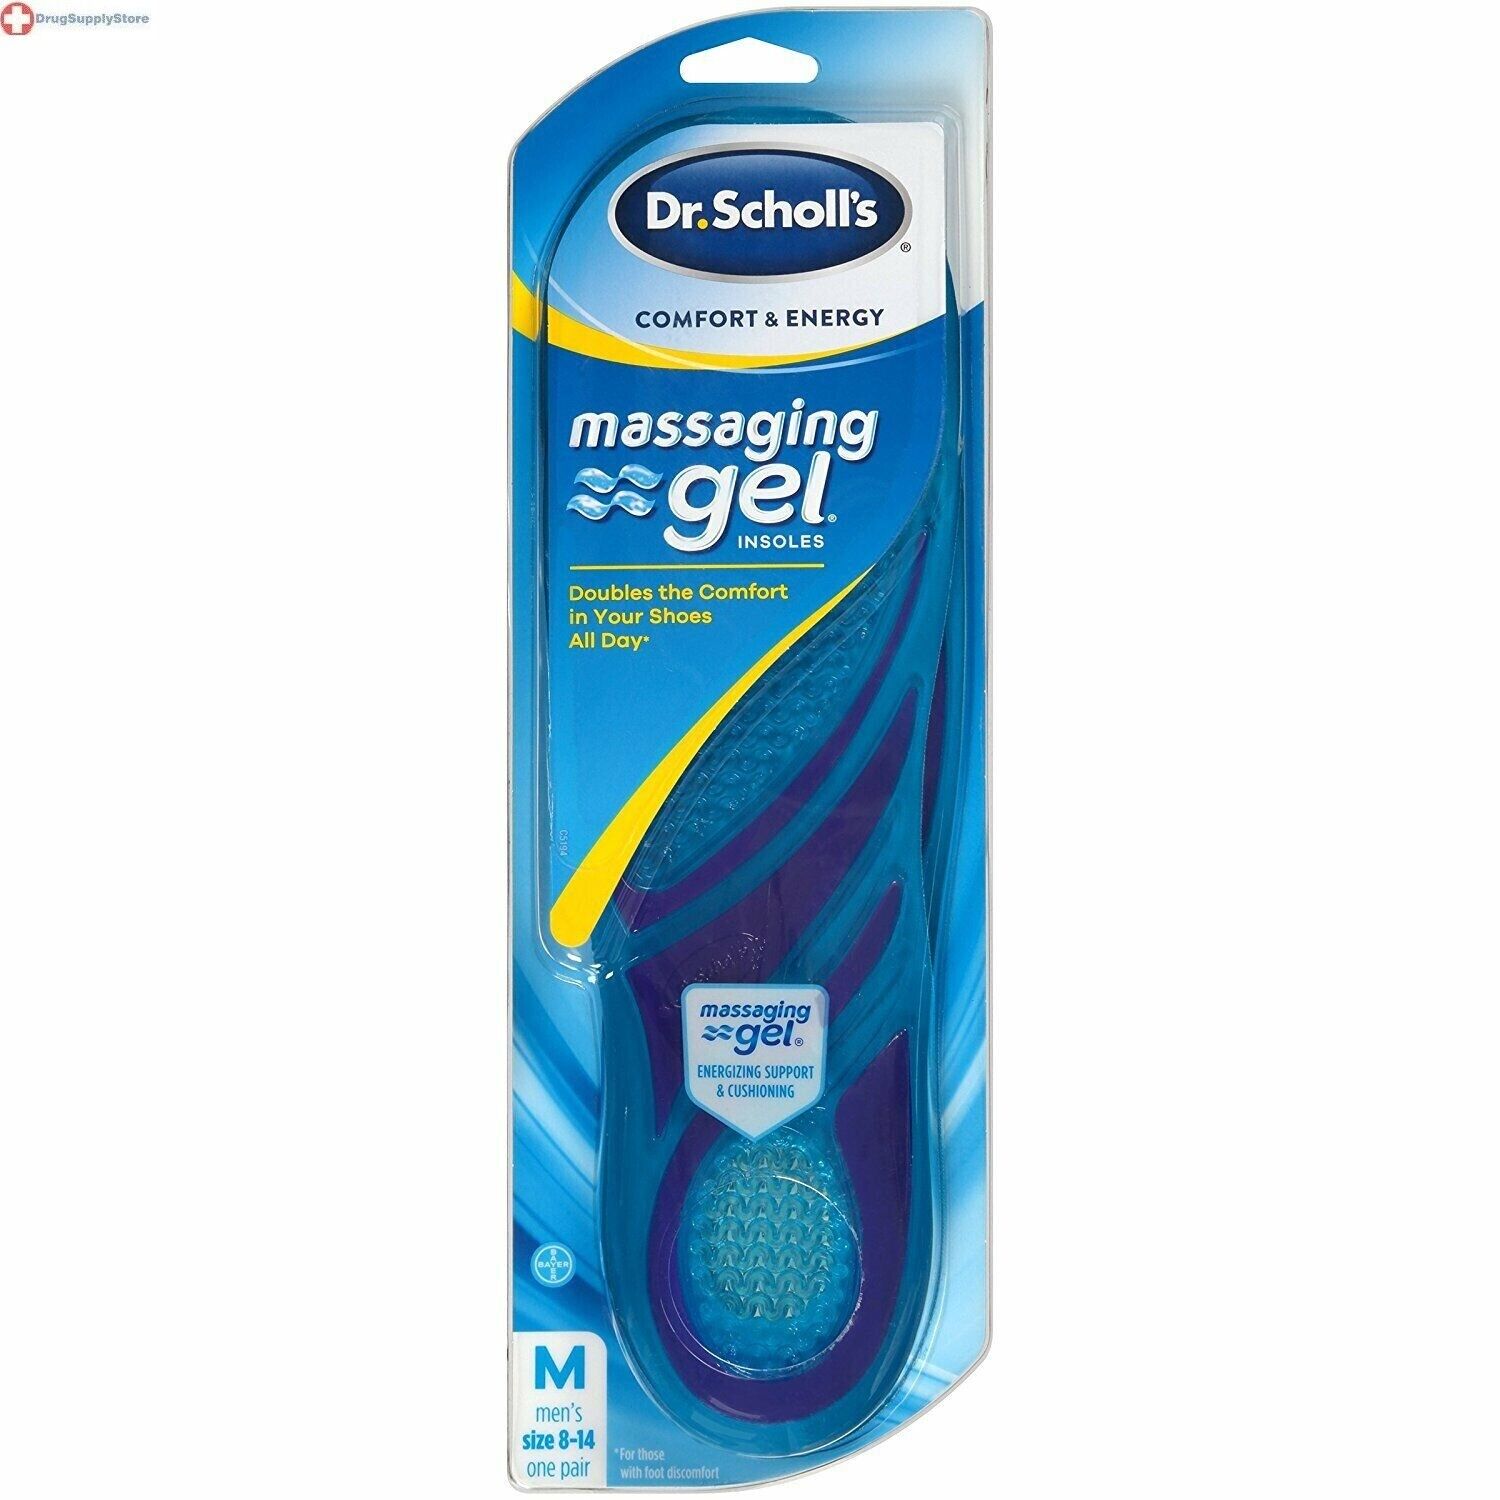 Dr. Scholl’s Comfort and Energy Massaging Gel Insoles for 